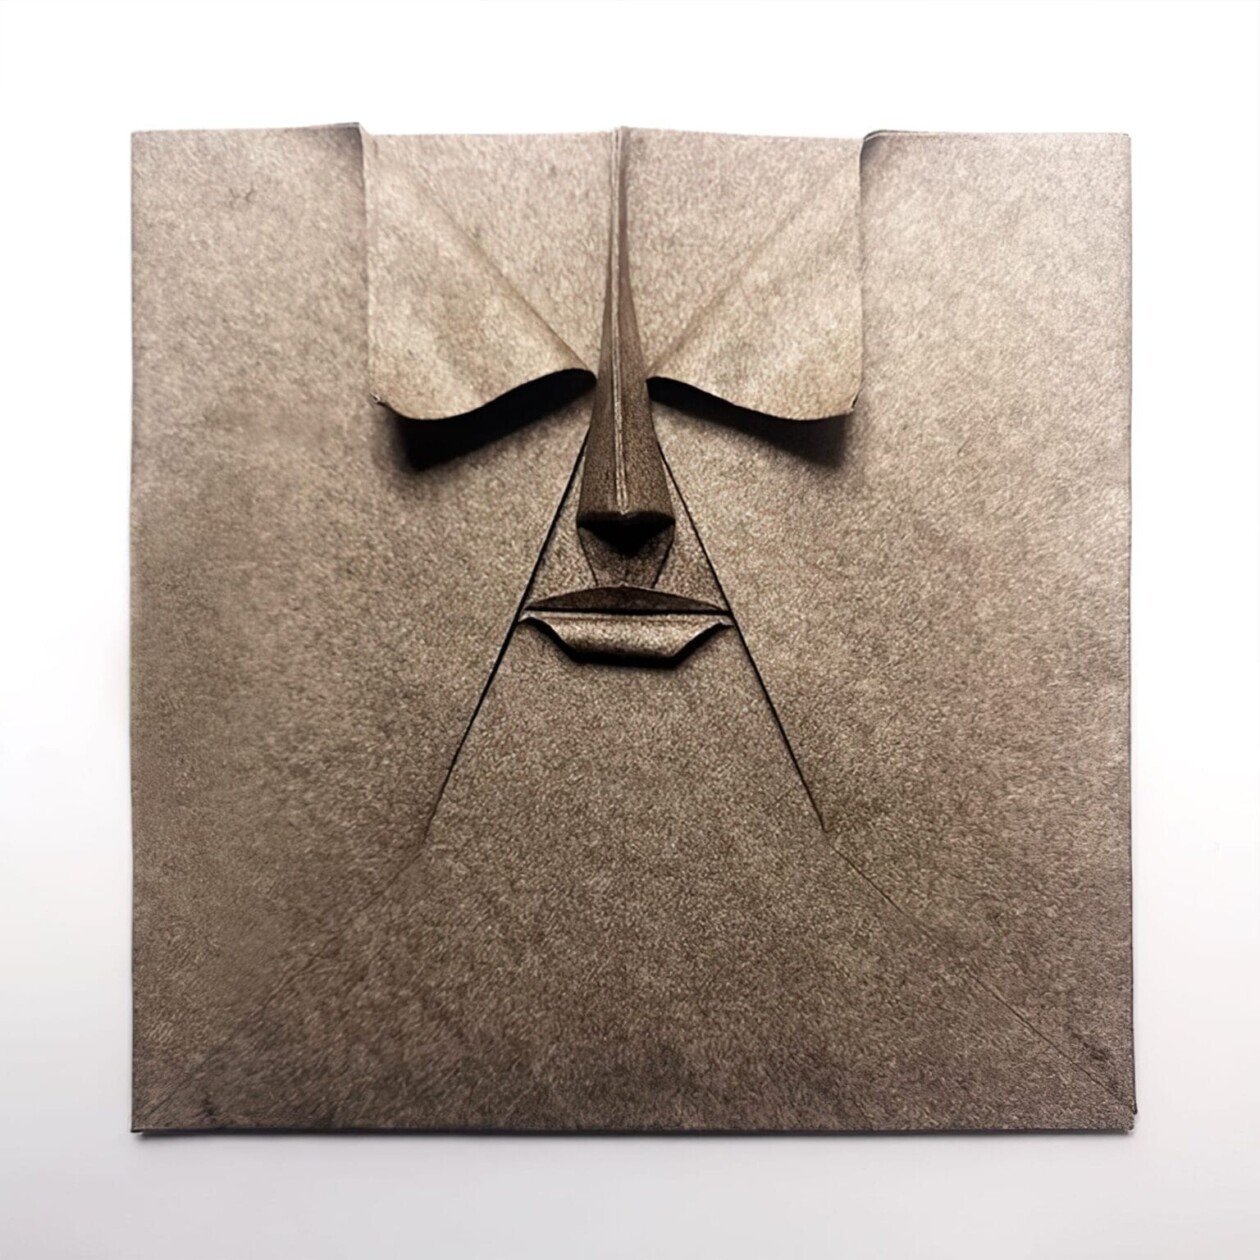 Amazingly Intricate Sculptural Portraits Made From Single Pieces Of Paper By João Charrua (7)